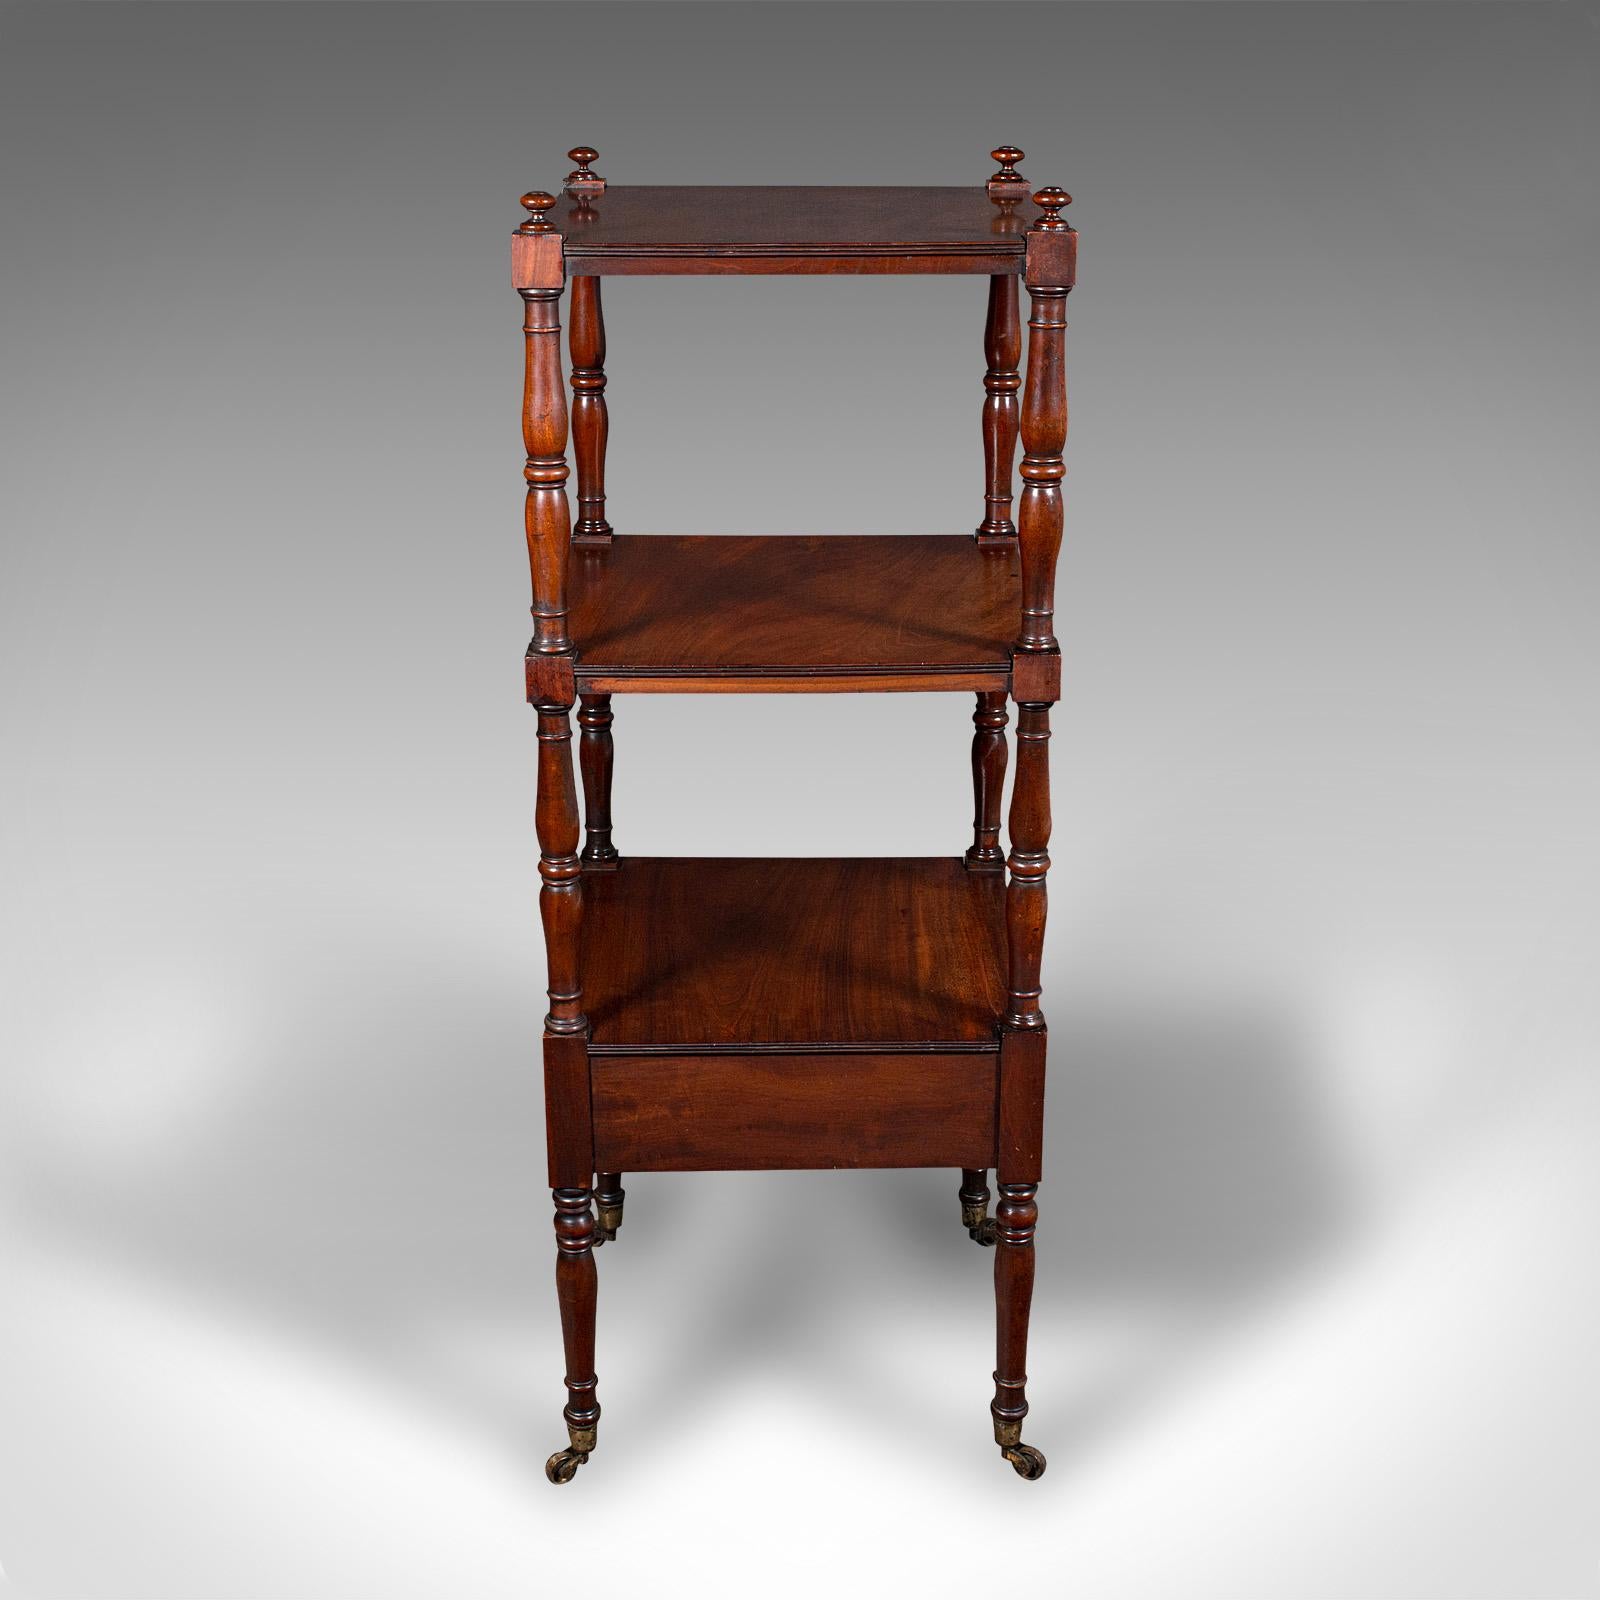 Antique 3 Tier Whatnot, English, Open Display Stand, Late Georgian, Circa 1800 In Good Condition For Sale In Hele, Devon, GB